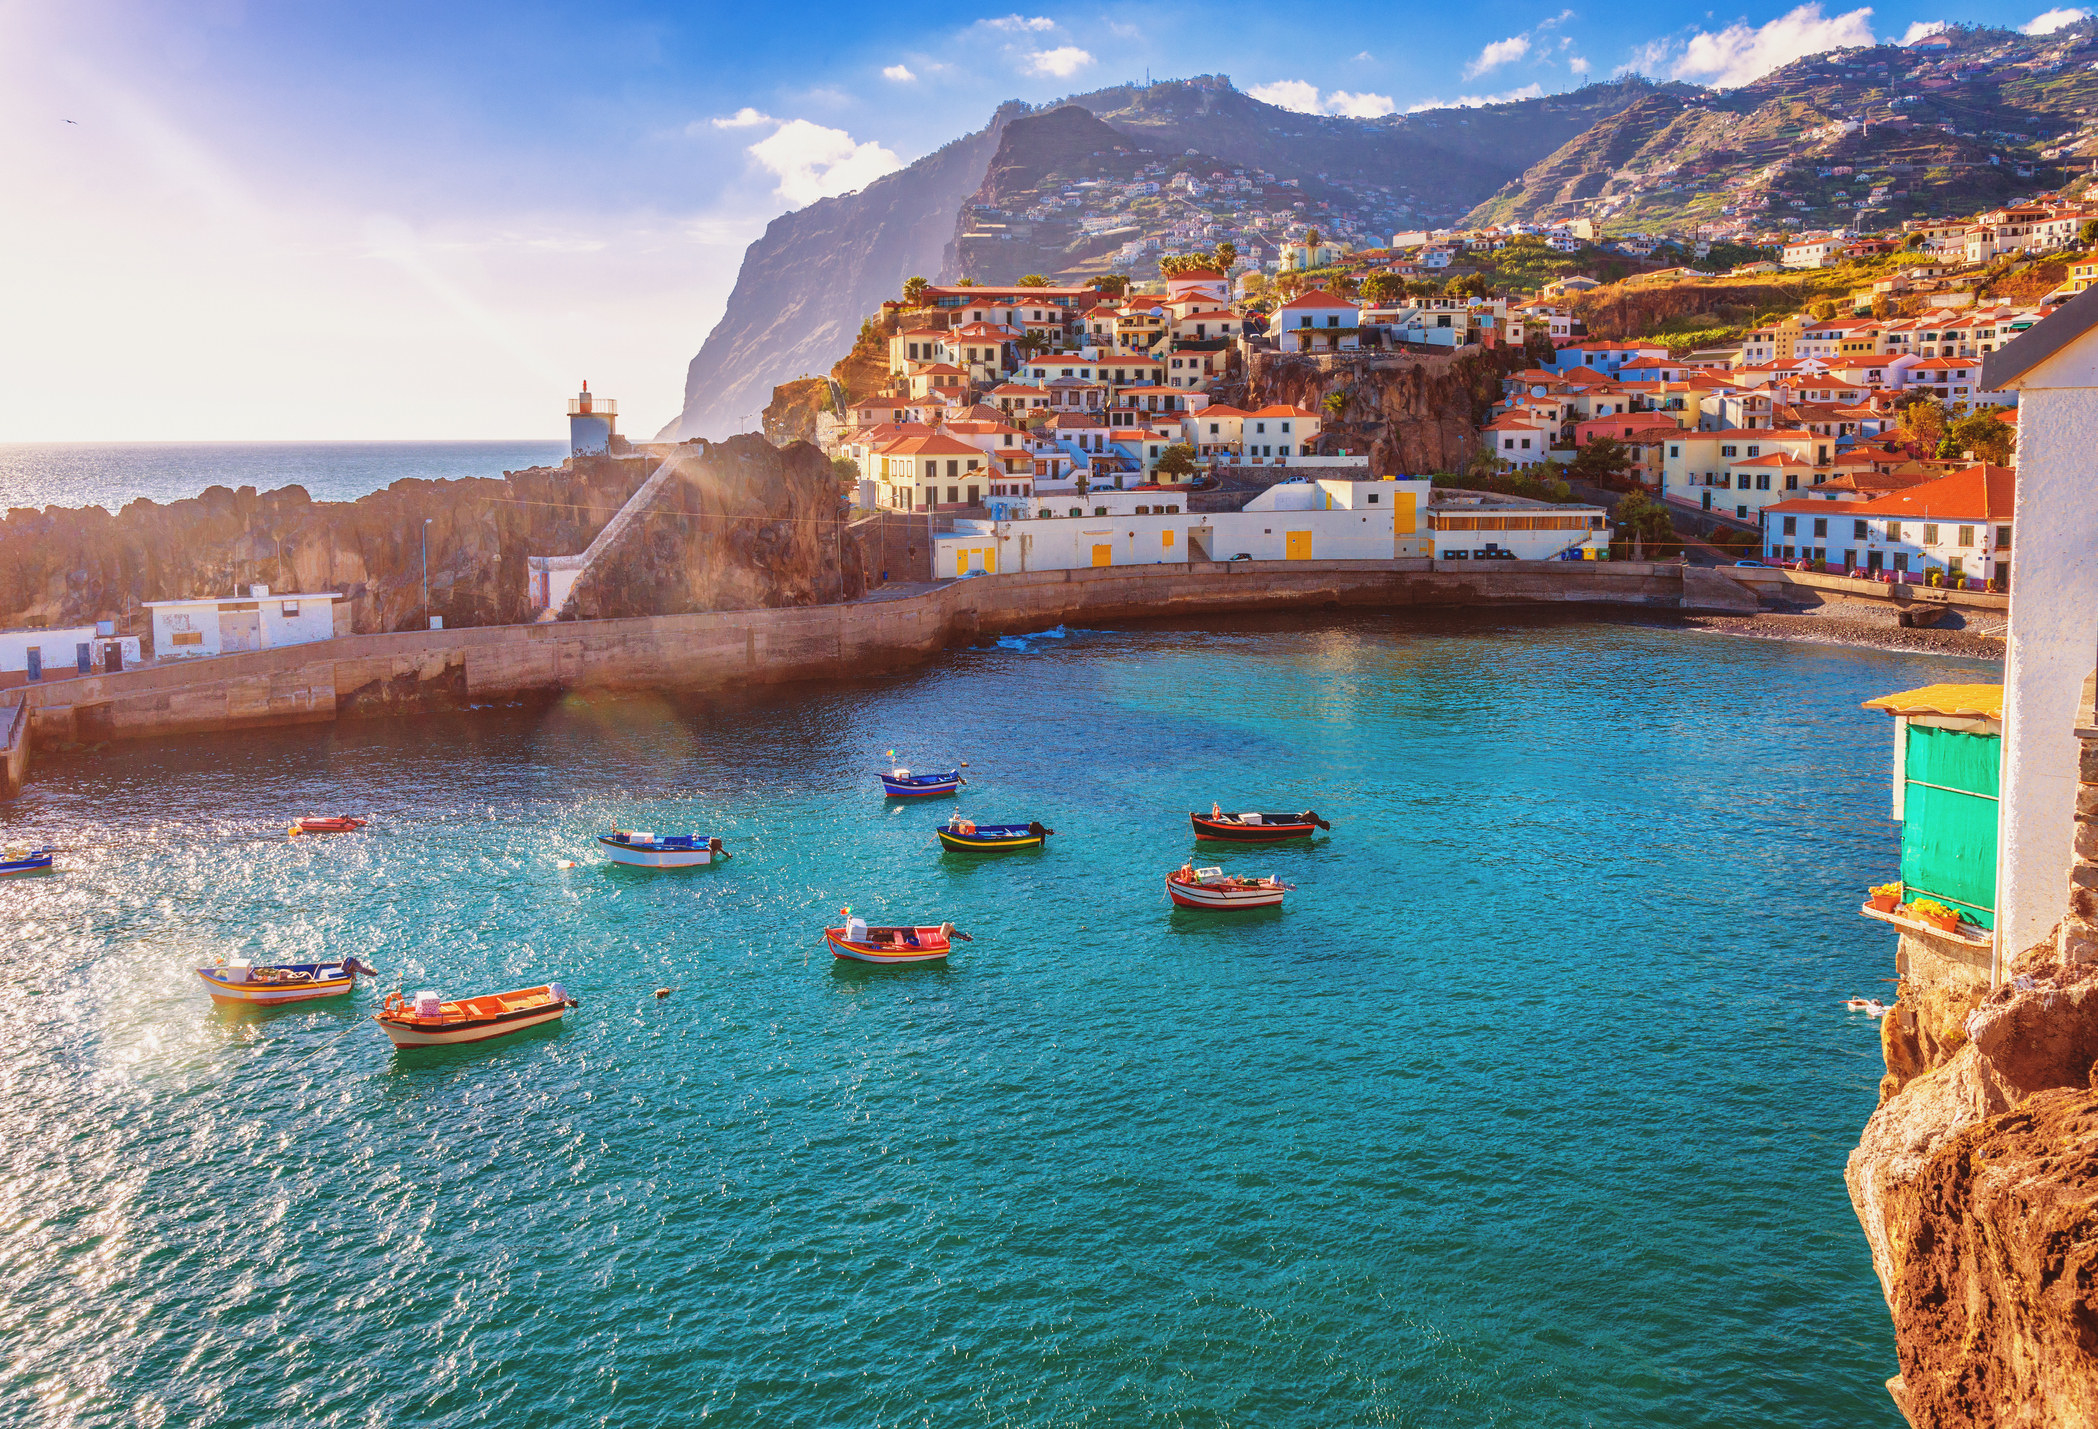 A fishing village on the island of Madeira